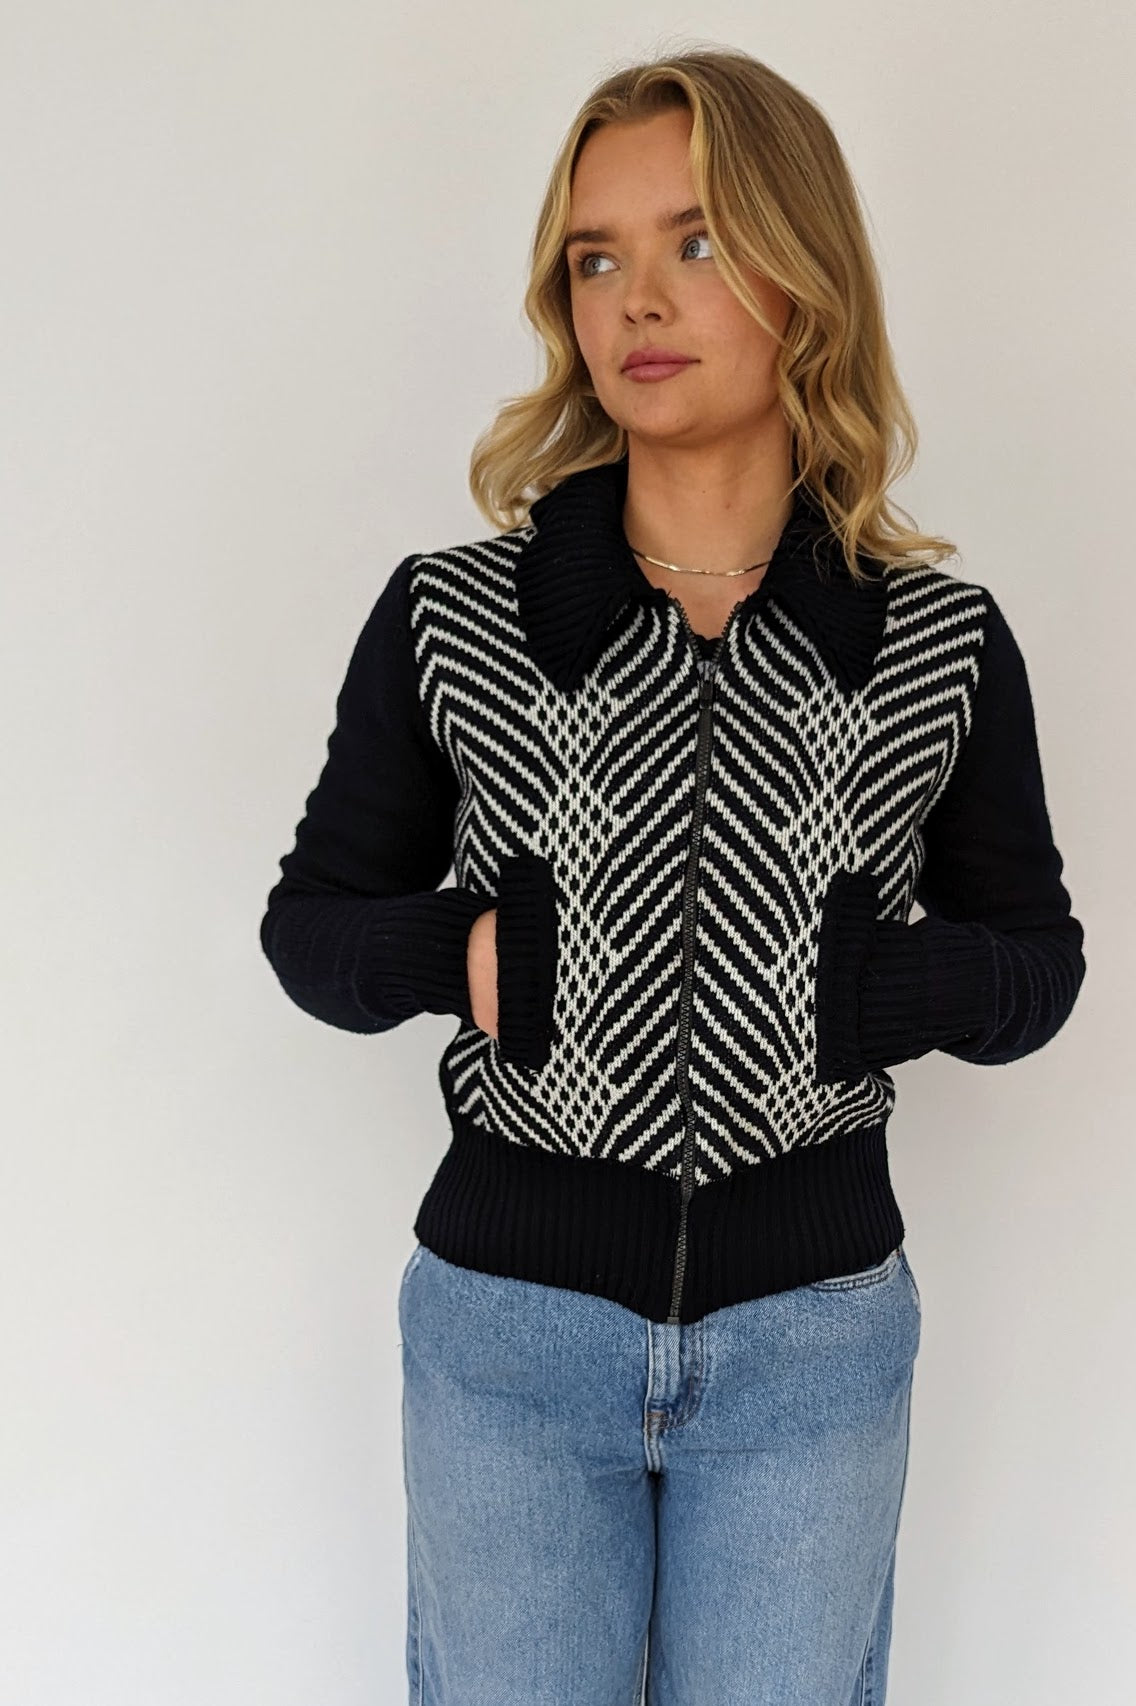 60s Cropped Geometric Black and White Cardigan